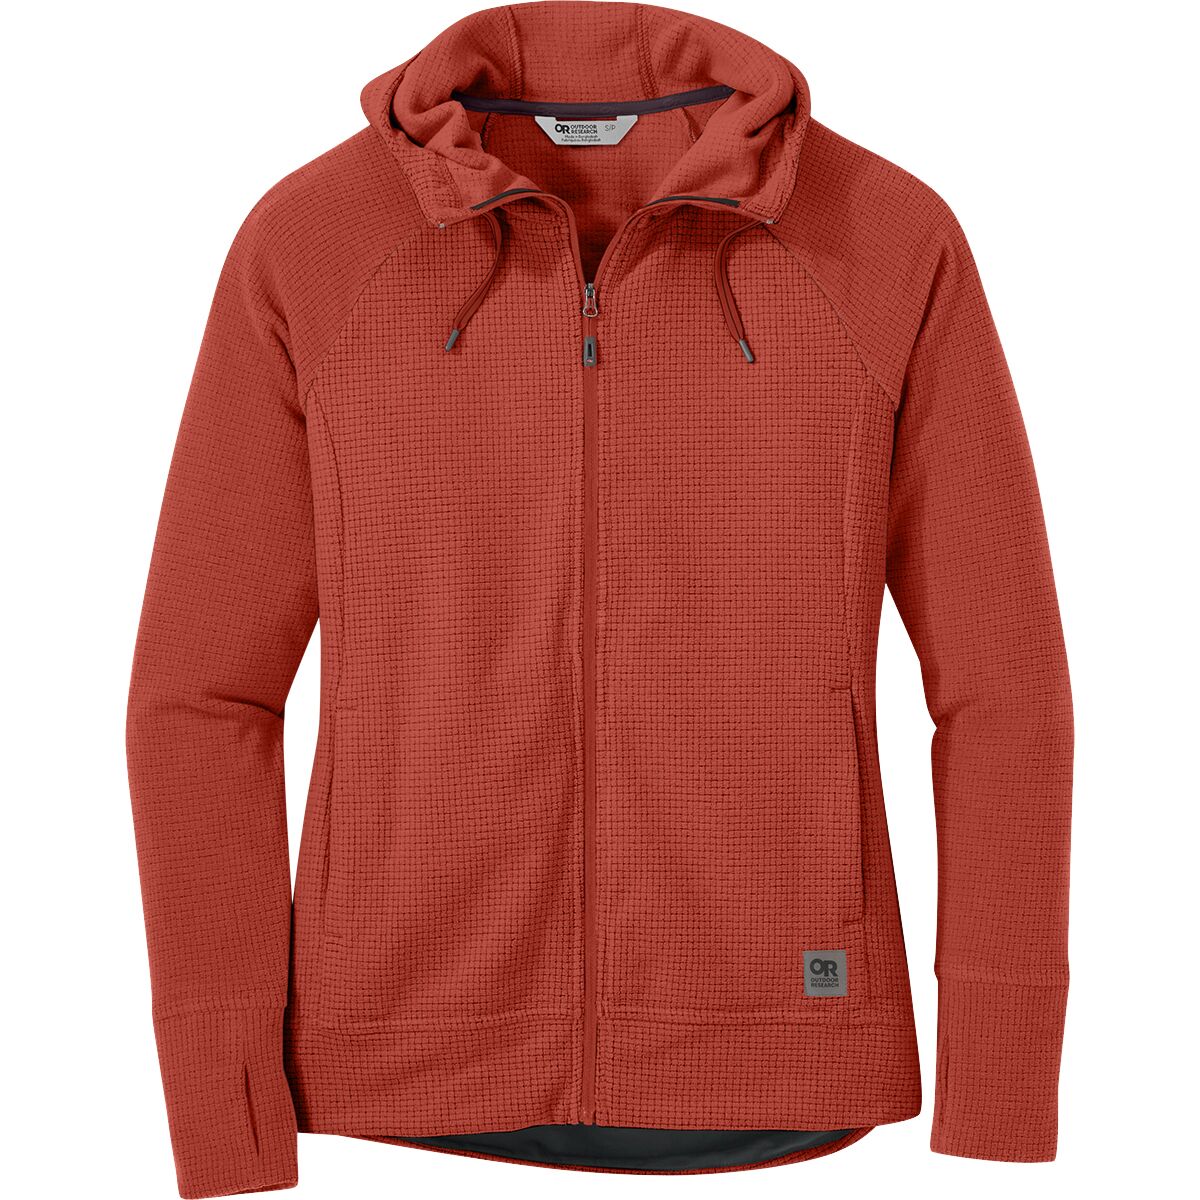 Outdoor Research Trail Mix Fleece Jacket - Women's product image